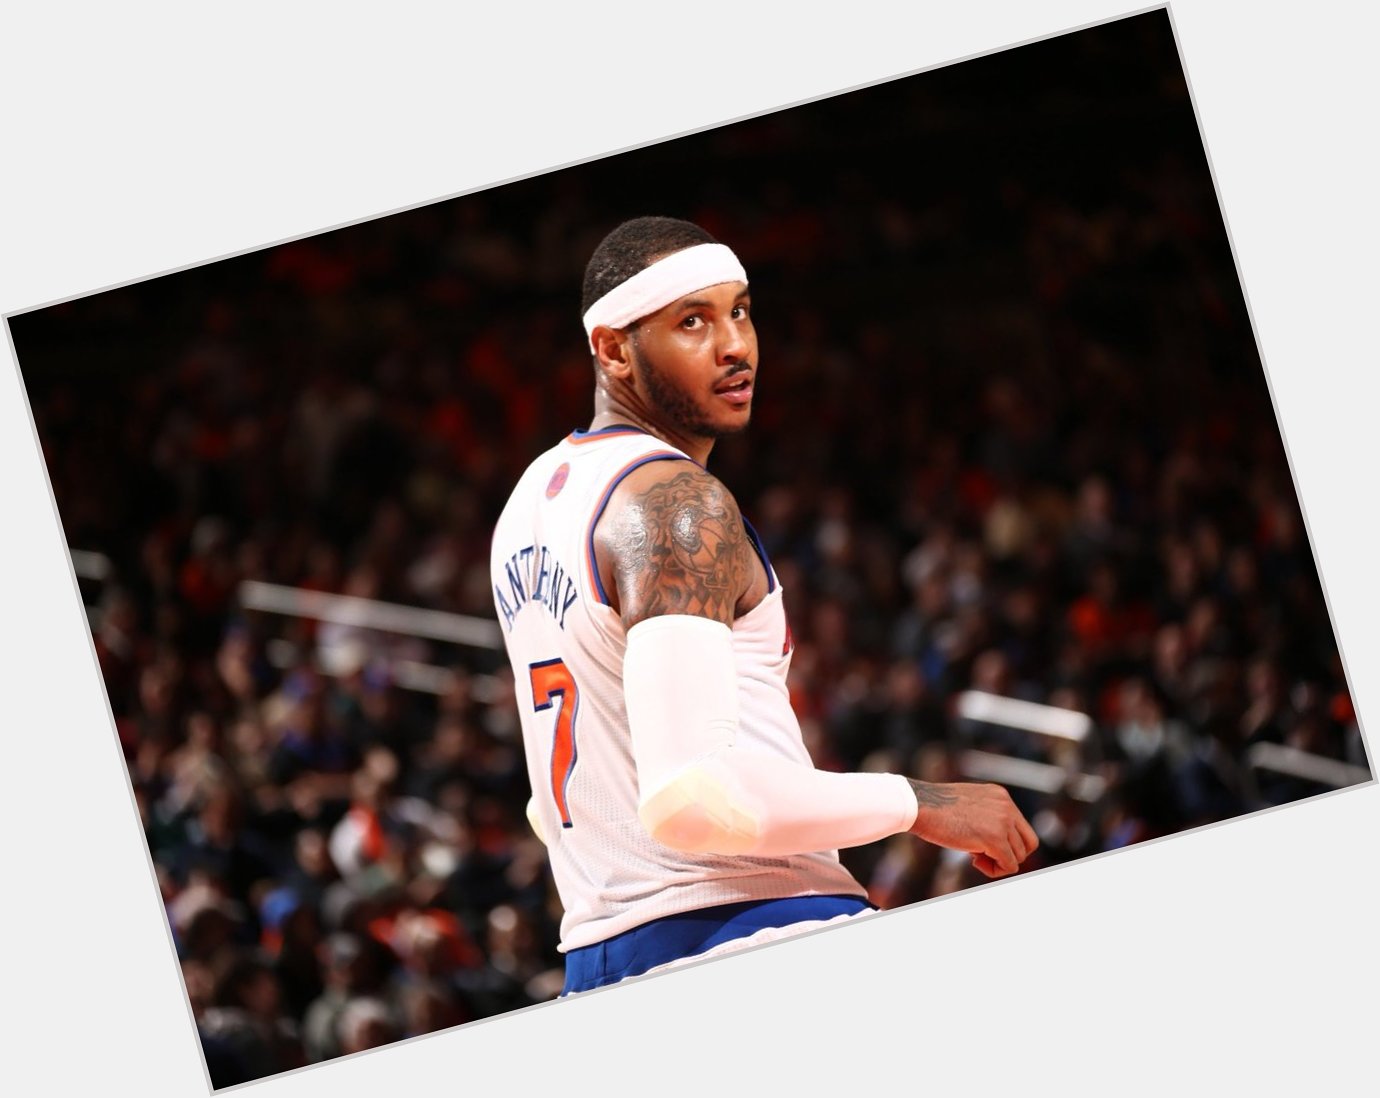 TODAY IS THE MOST IMPORTANT DAY OF THE YEAR. IT S THE GOAT S BIRTHDAY. HAPPY BIRTHDAY CARMELO ANTHONY      